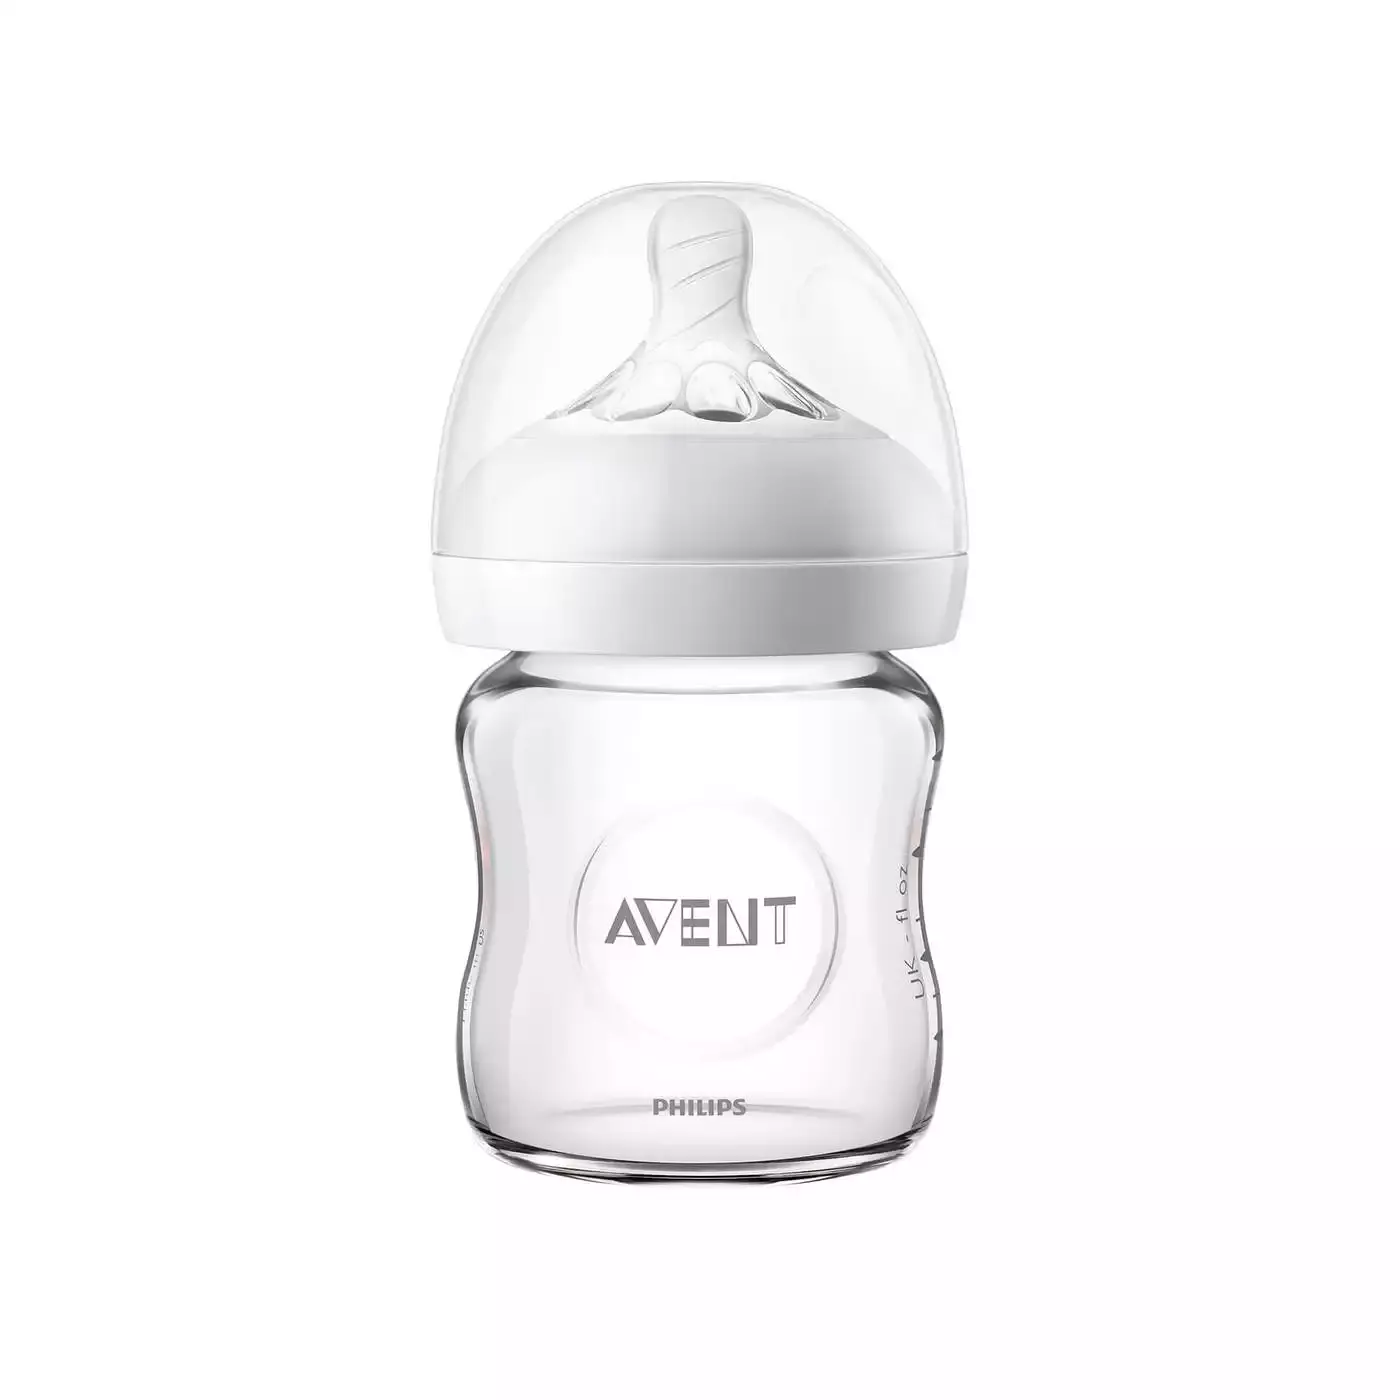 Natural Glasflasche 120 ml PHILIPS AVENT 2000576151401 4